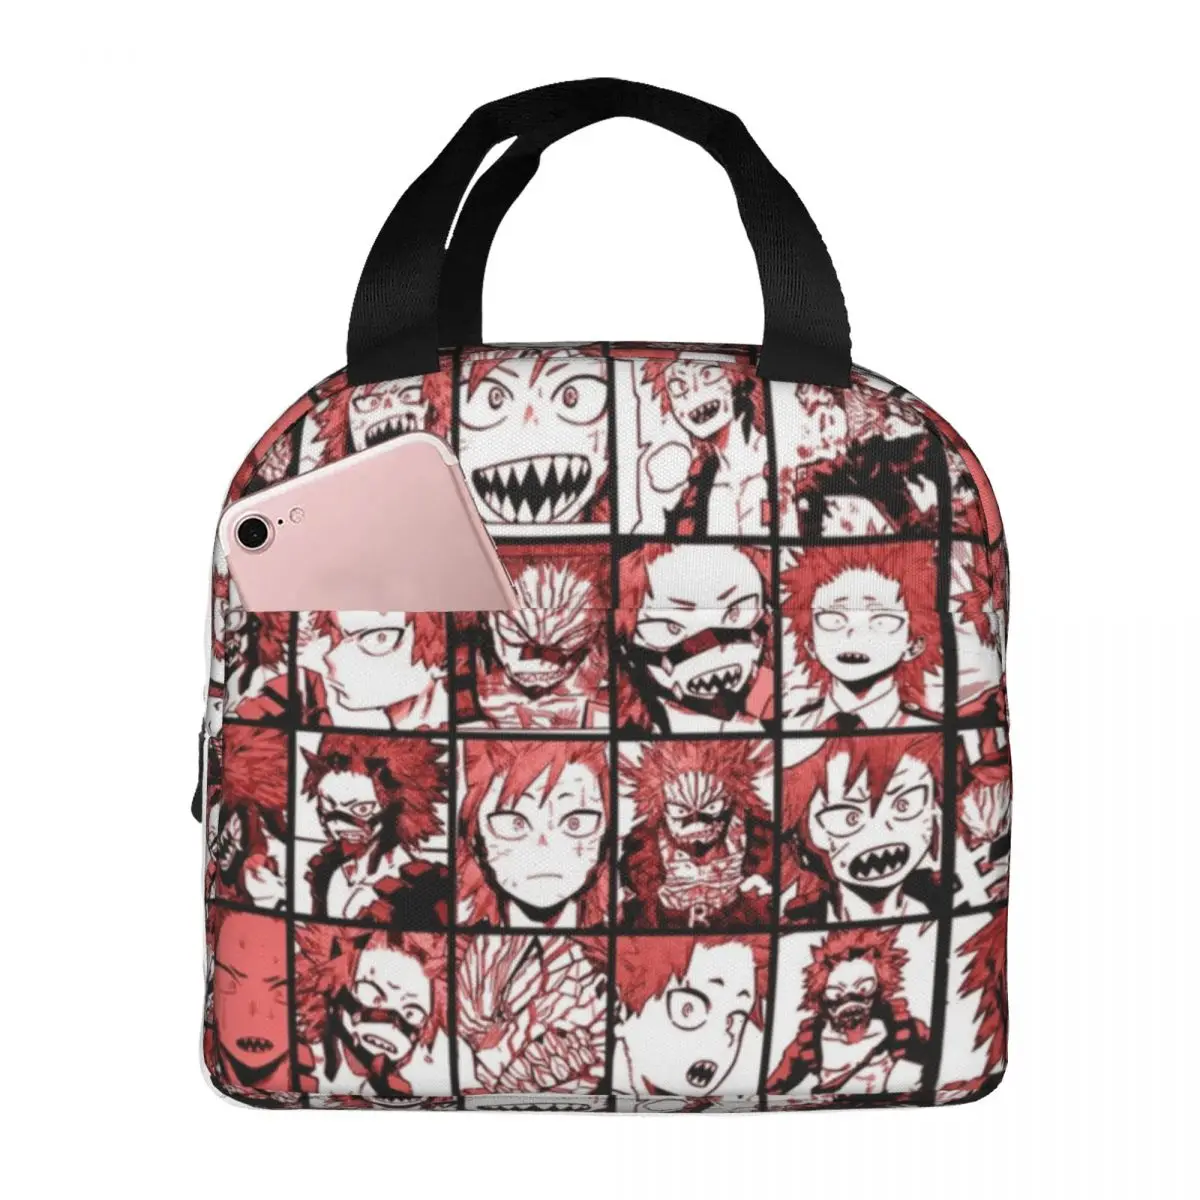 My Hero Academia BNHA Kirishima Collage Lunch Bag Portable Insulated Oxford Cooler Bag Thermal Cold Food Picnic Lunch Box